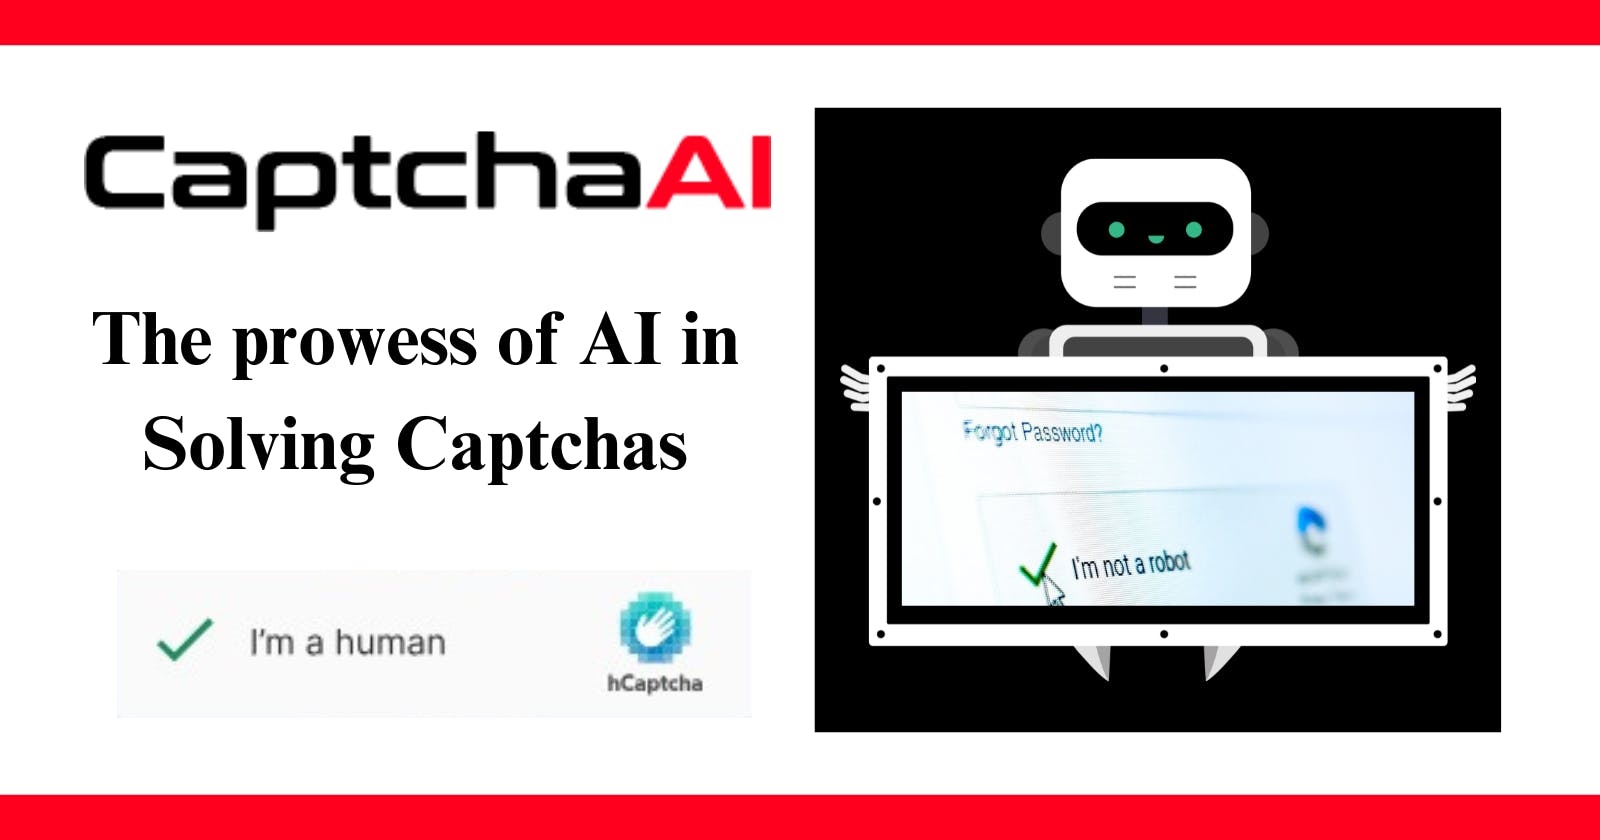 The prowess of AI in Solving Captchas